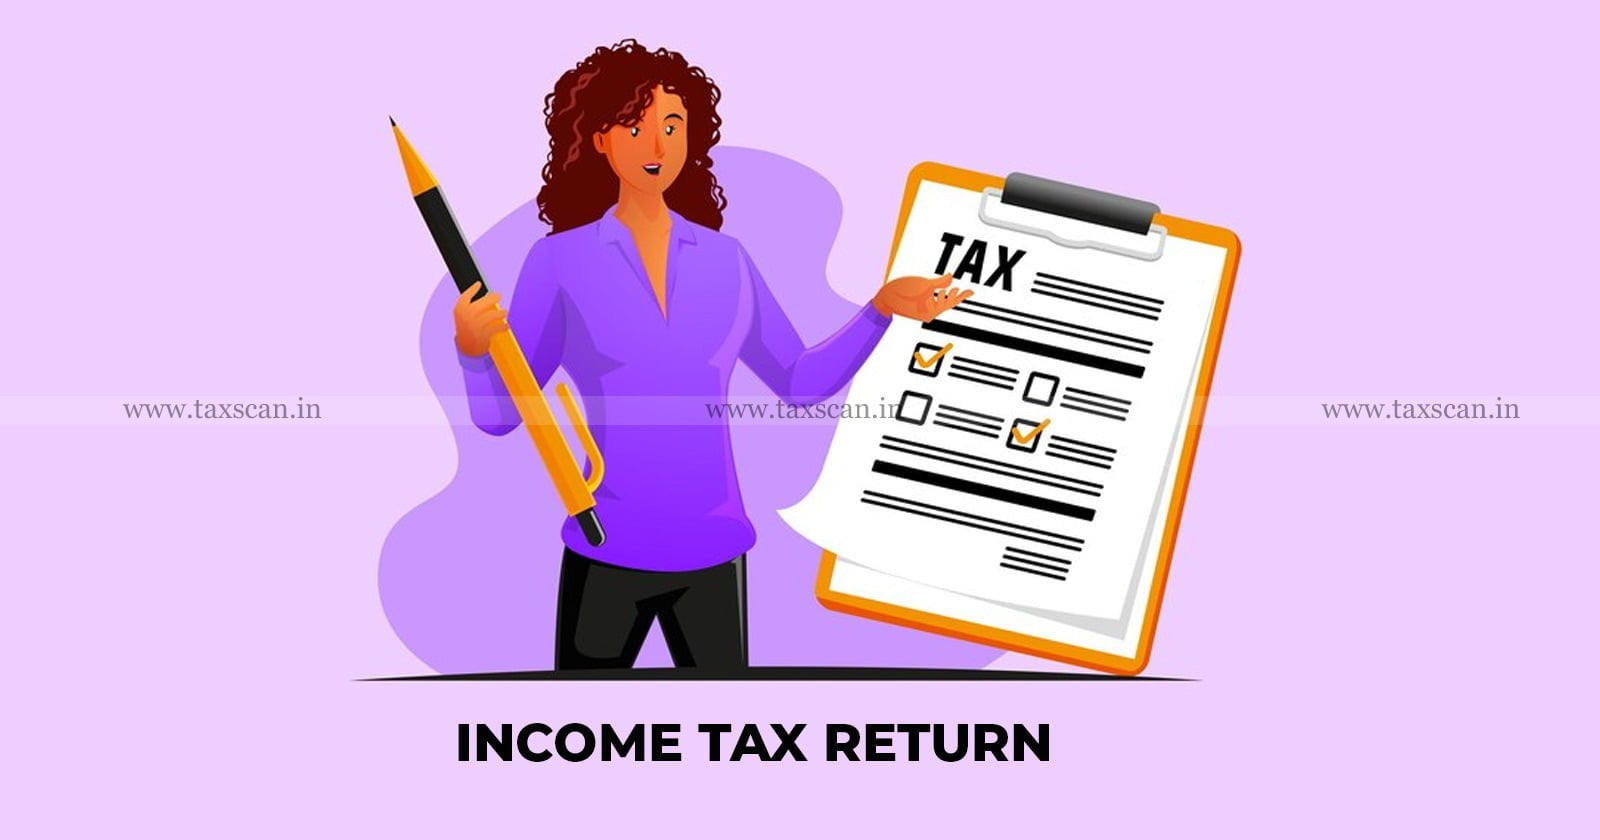 ITAT - income tax appellate tribunal - ITR filling - Invalid notices - Invalid notice issues - TAXSCAN